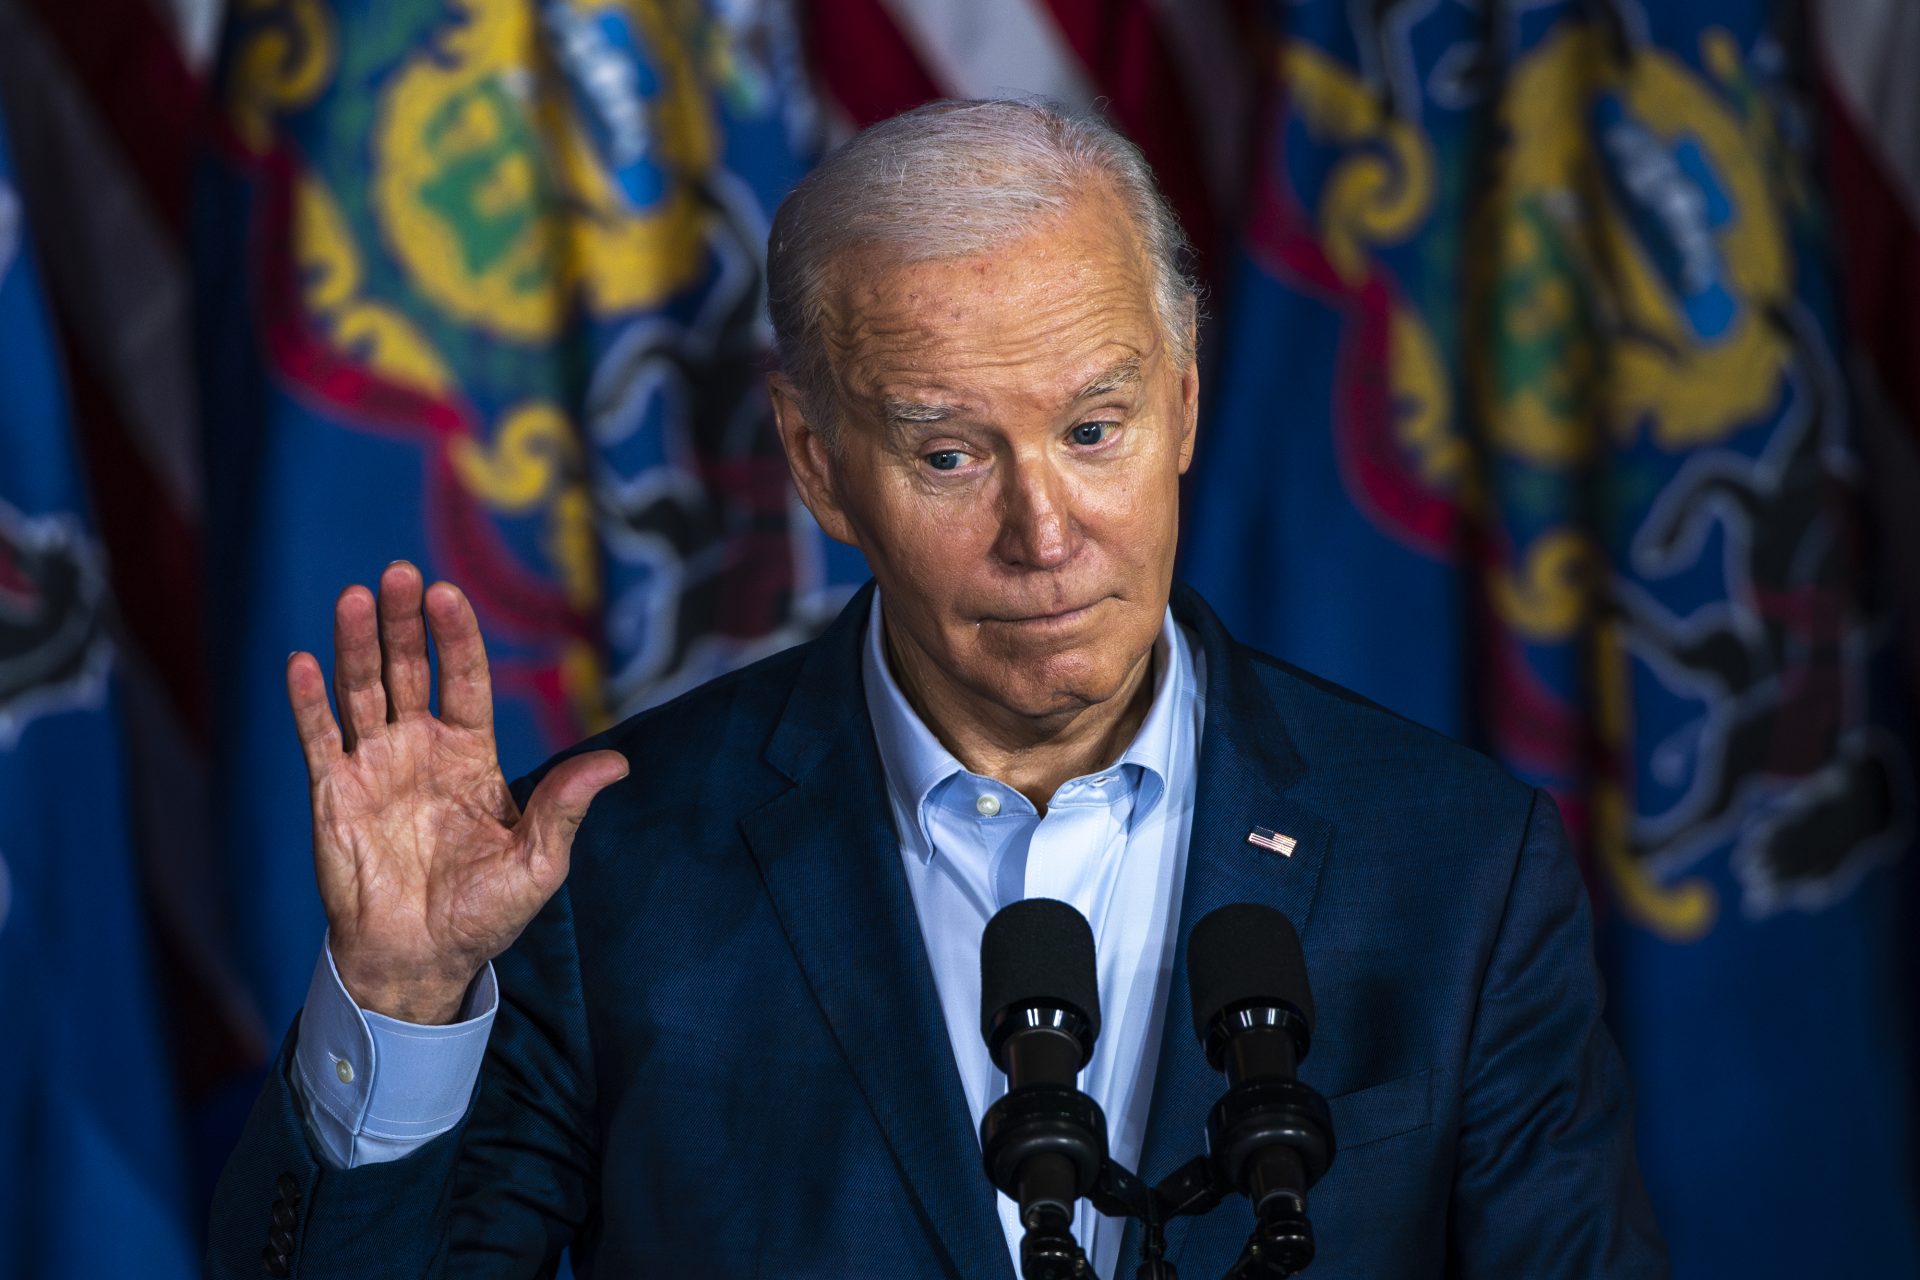 This was the most brutal message the Biden campaign has posted about Trump